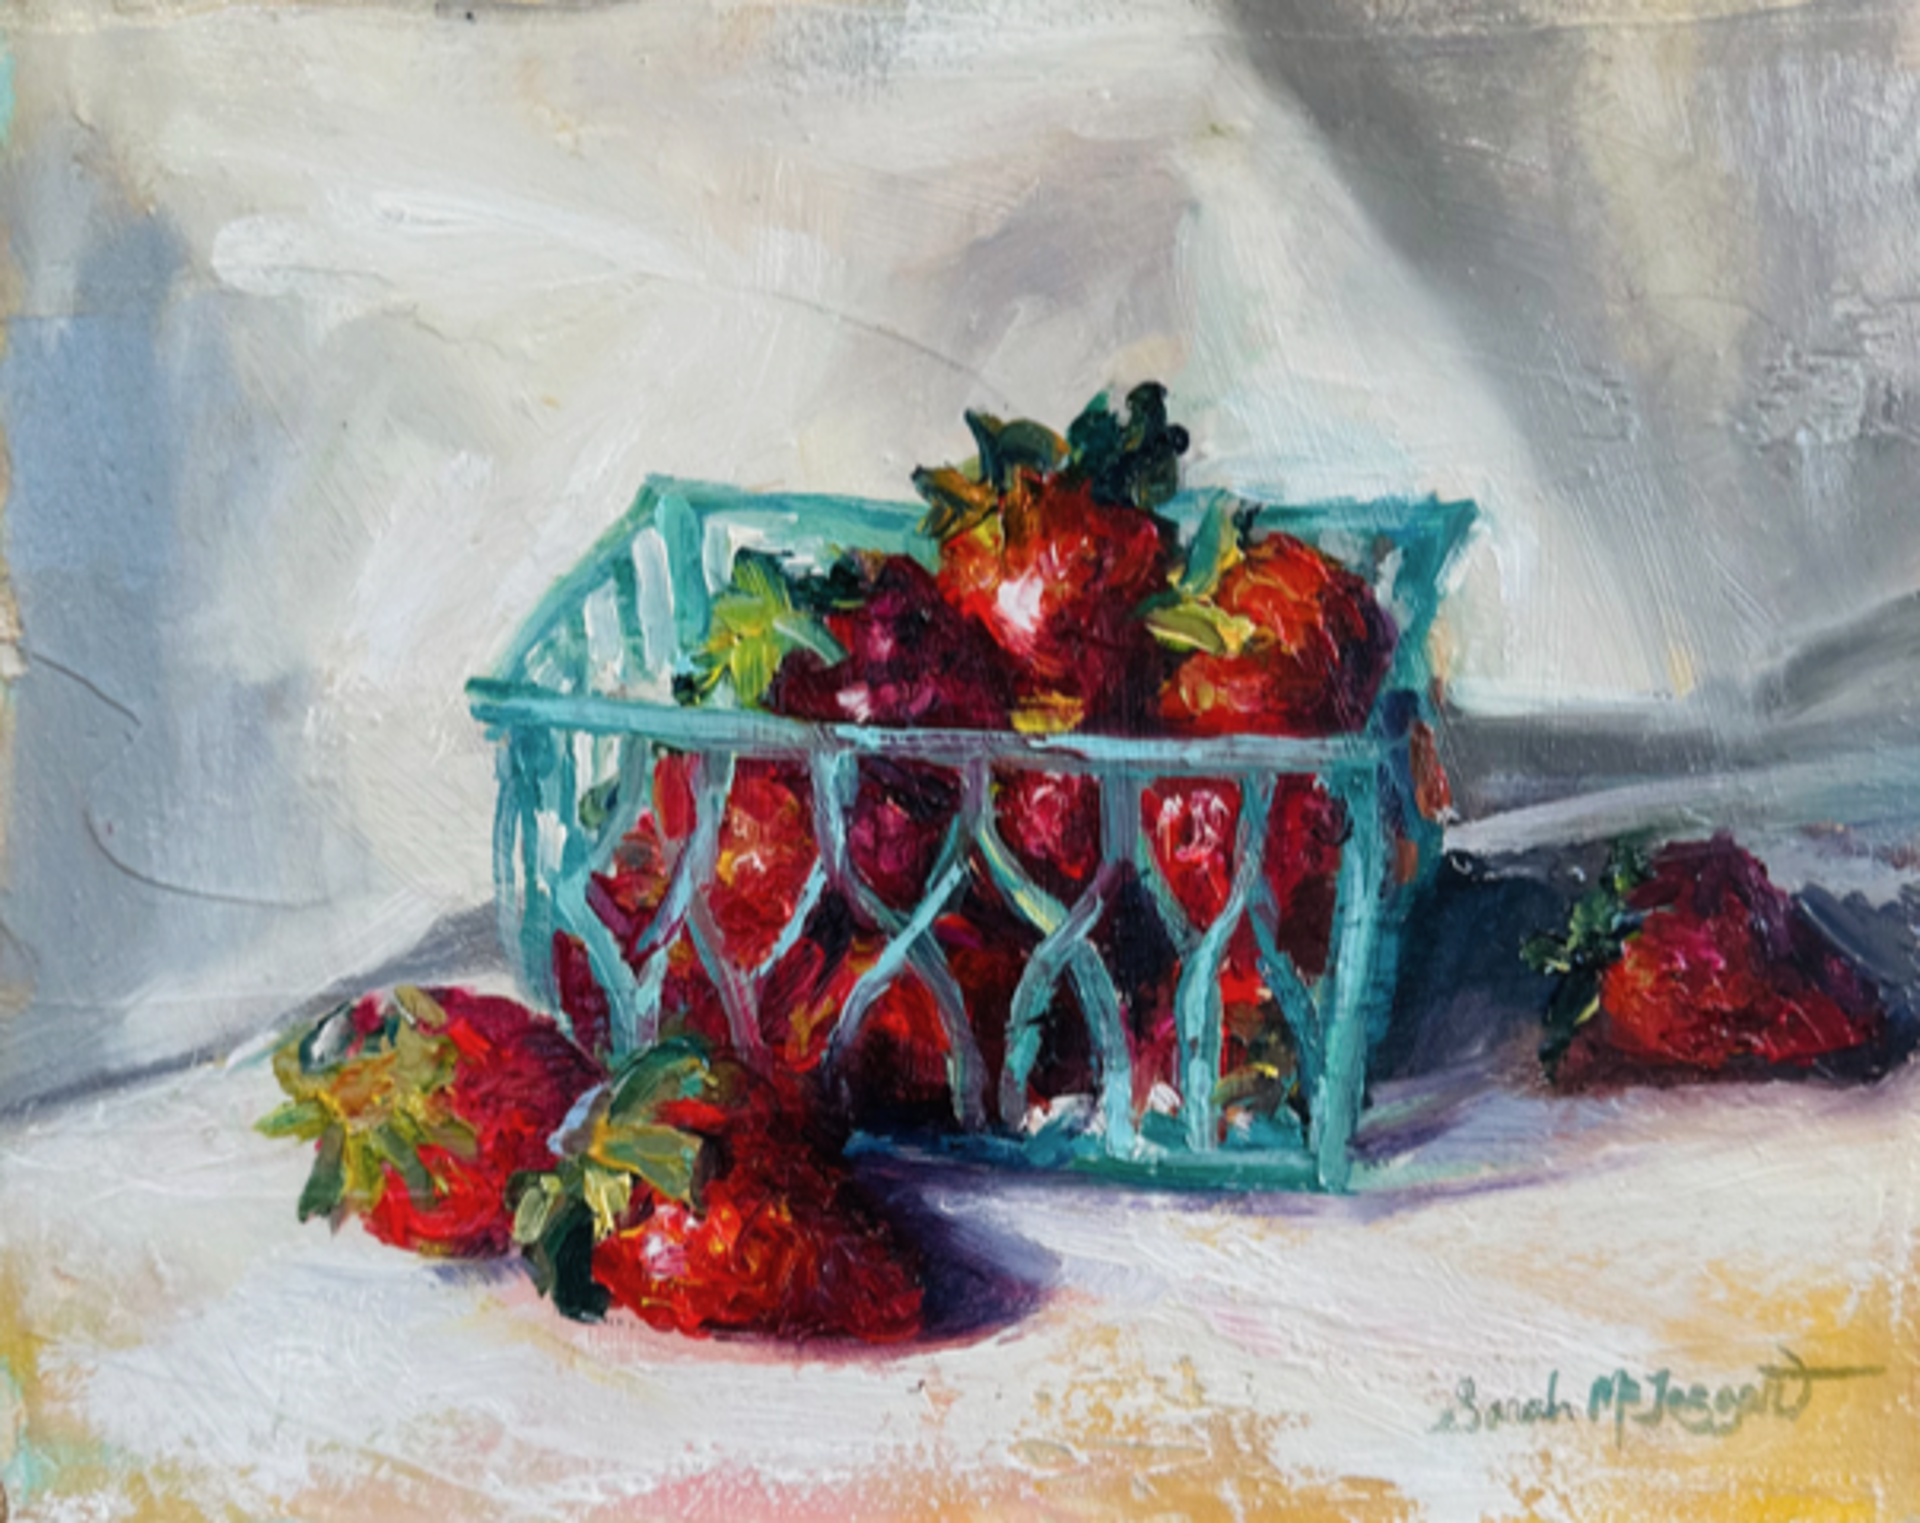 Strawberries by Sarah McTaggart